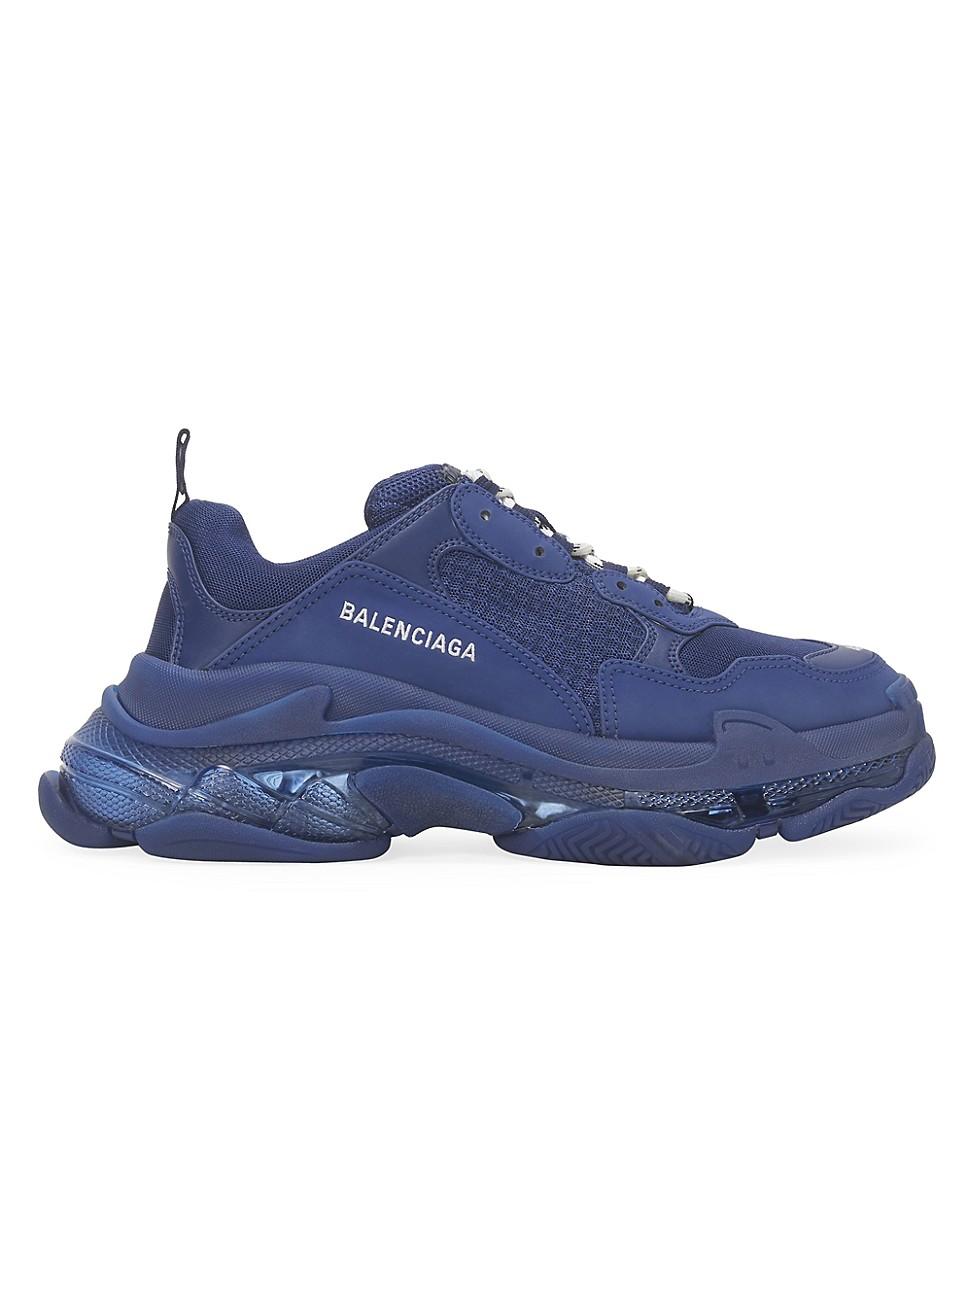 Balenciaga Triple S Airsole Leather And Mesh Trainers in Navy (Blue) | Lyst